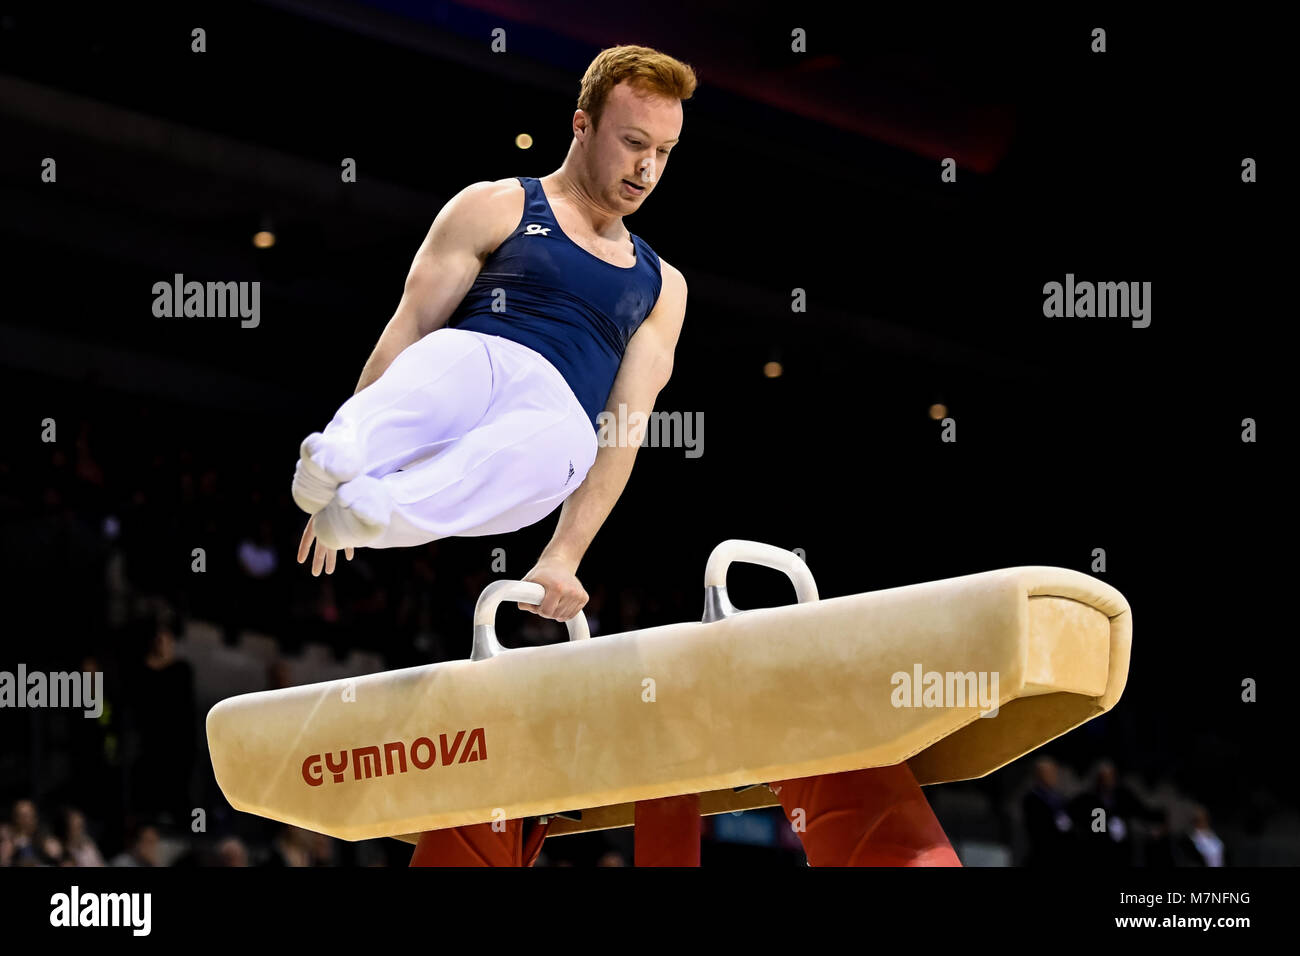 Echo Arena, Liverpool, UK. 11th Mar, 2018. Tony Duchars competes on the Pommel Horse during the WAG Senior Apparatus Final/MAG Masters of the 2018 Gymnastics British Championships at Echo Arena on Sunday, 11 March 2018. LIVERPOOL ENGLAND. Credit: Taka G Wu Credit: Taka Wu/Alamy Live News Stock Photo